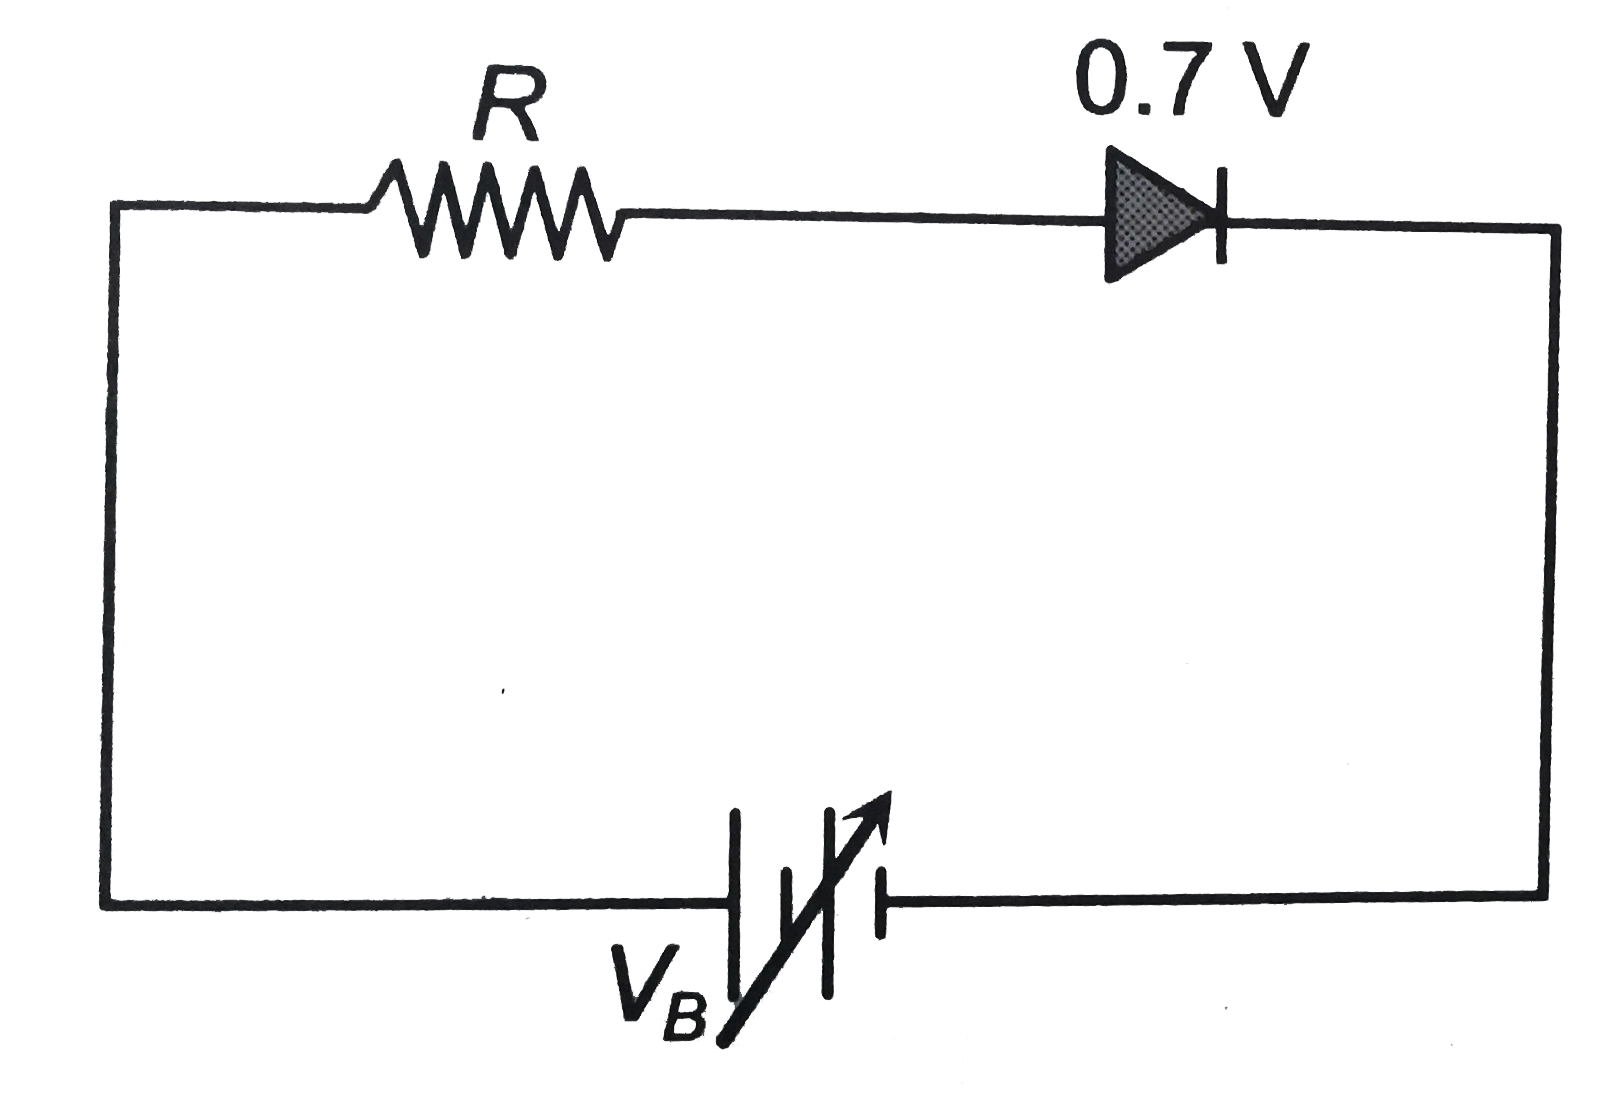 The junction diode in the following circuit requires a minimum current of 1 mA to be above the knee point (0.7 V) of its I-V characterstic curve. The voltage across the diode is independent of current above the knee point. If V(B)=5 V, then the maximum value of R so that the voltage is above the knee point, will be